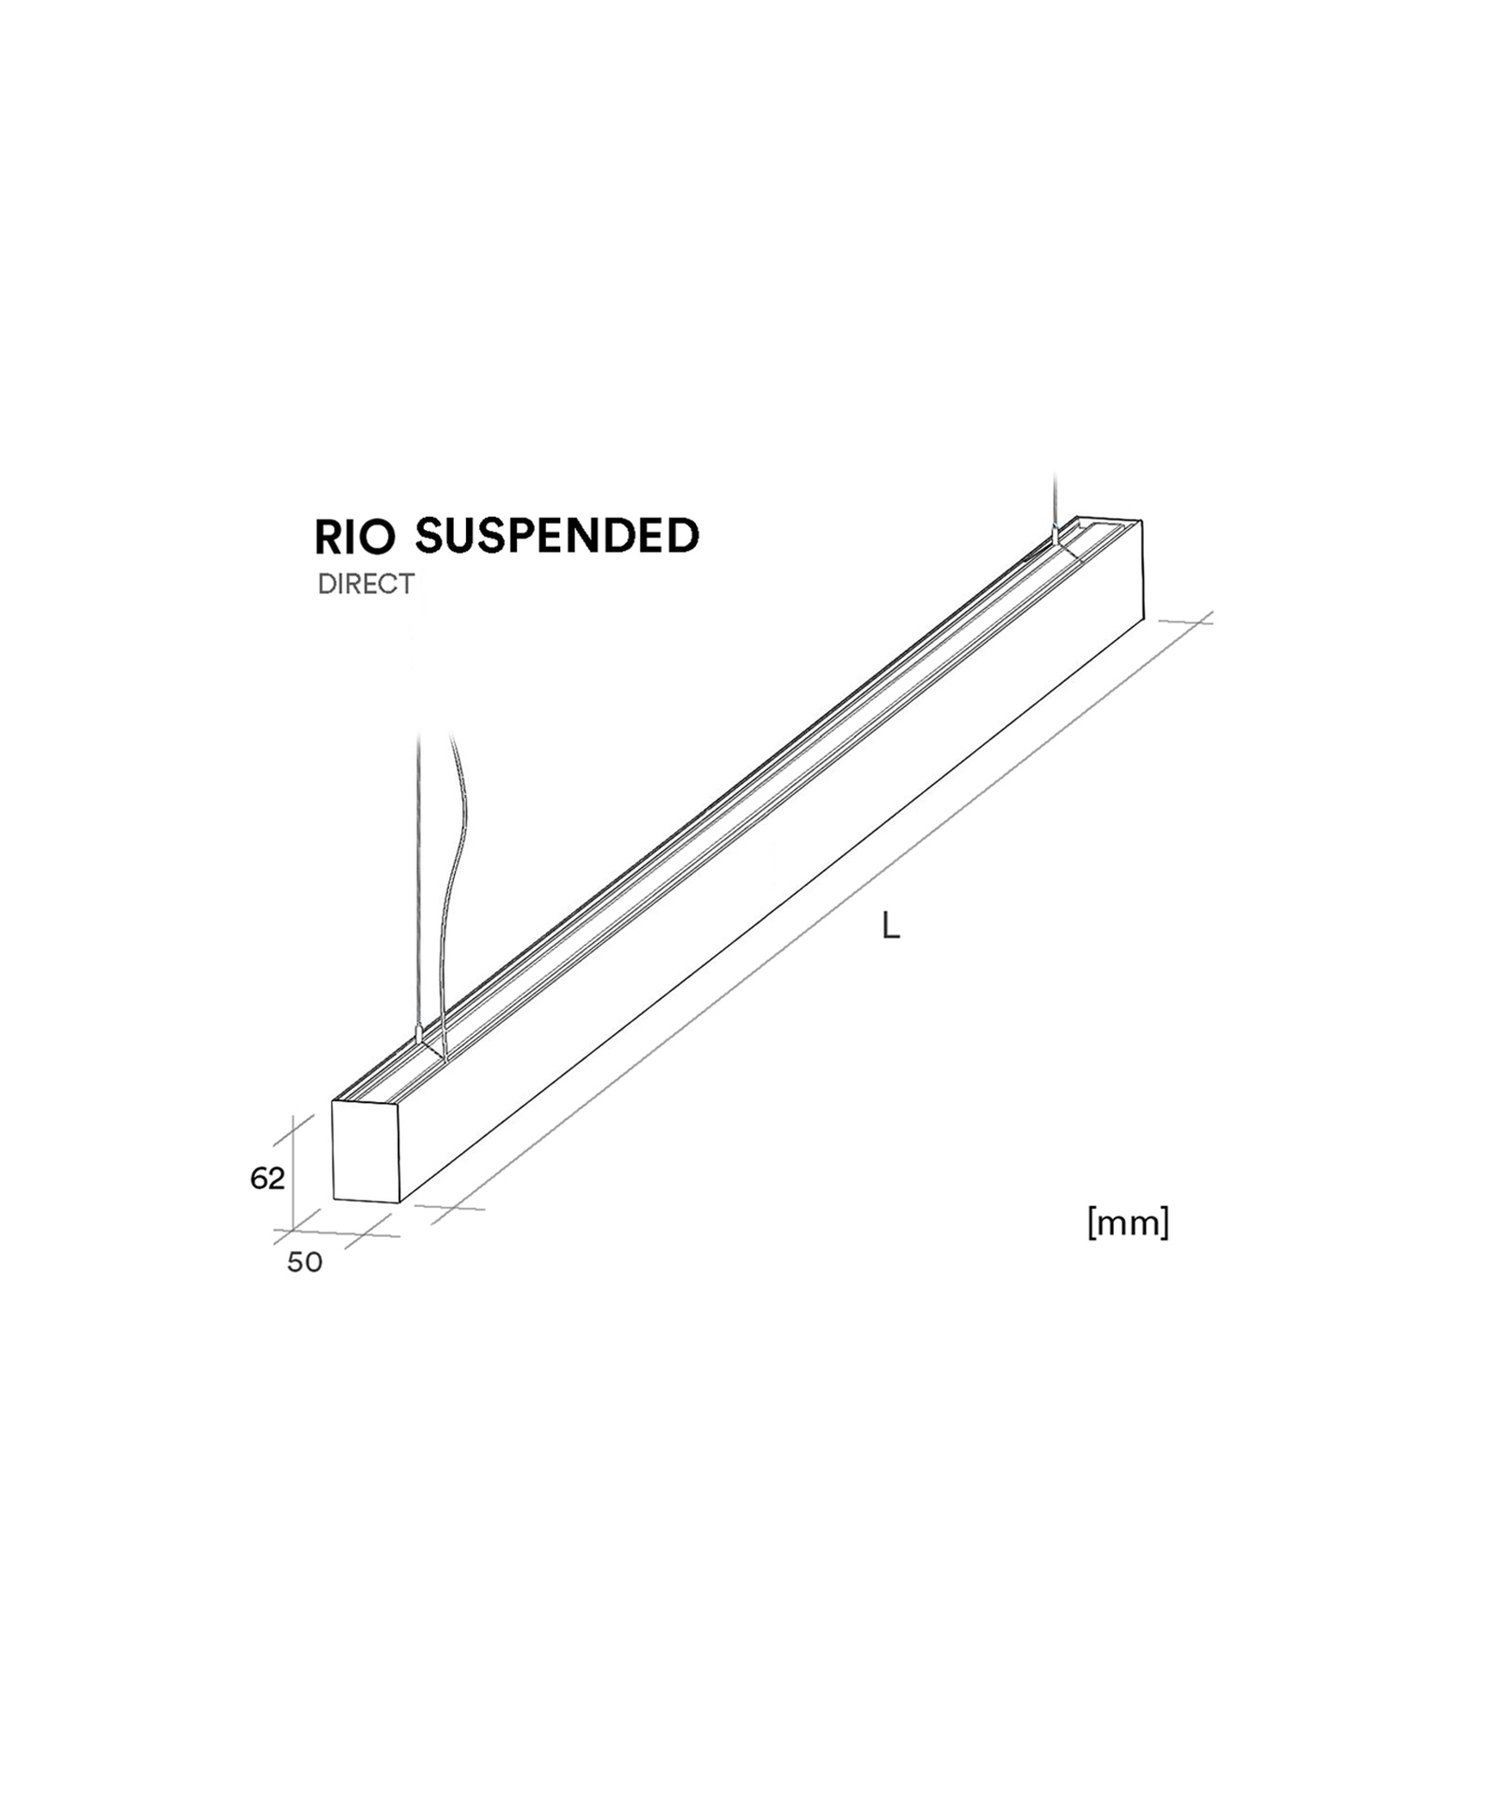 rio-suspended-direct-technical-drawing